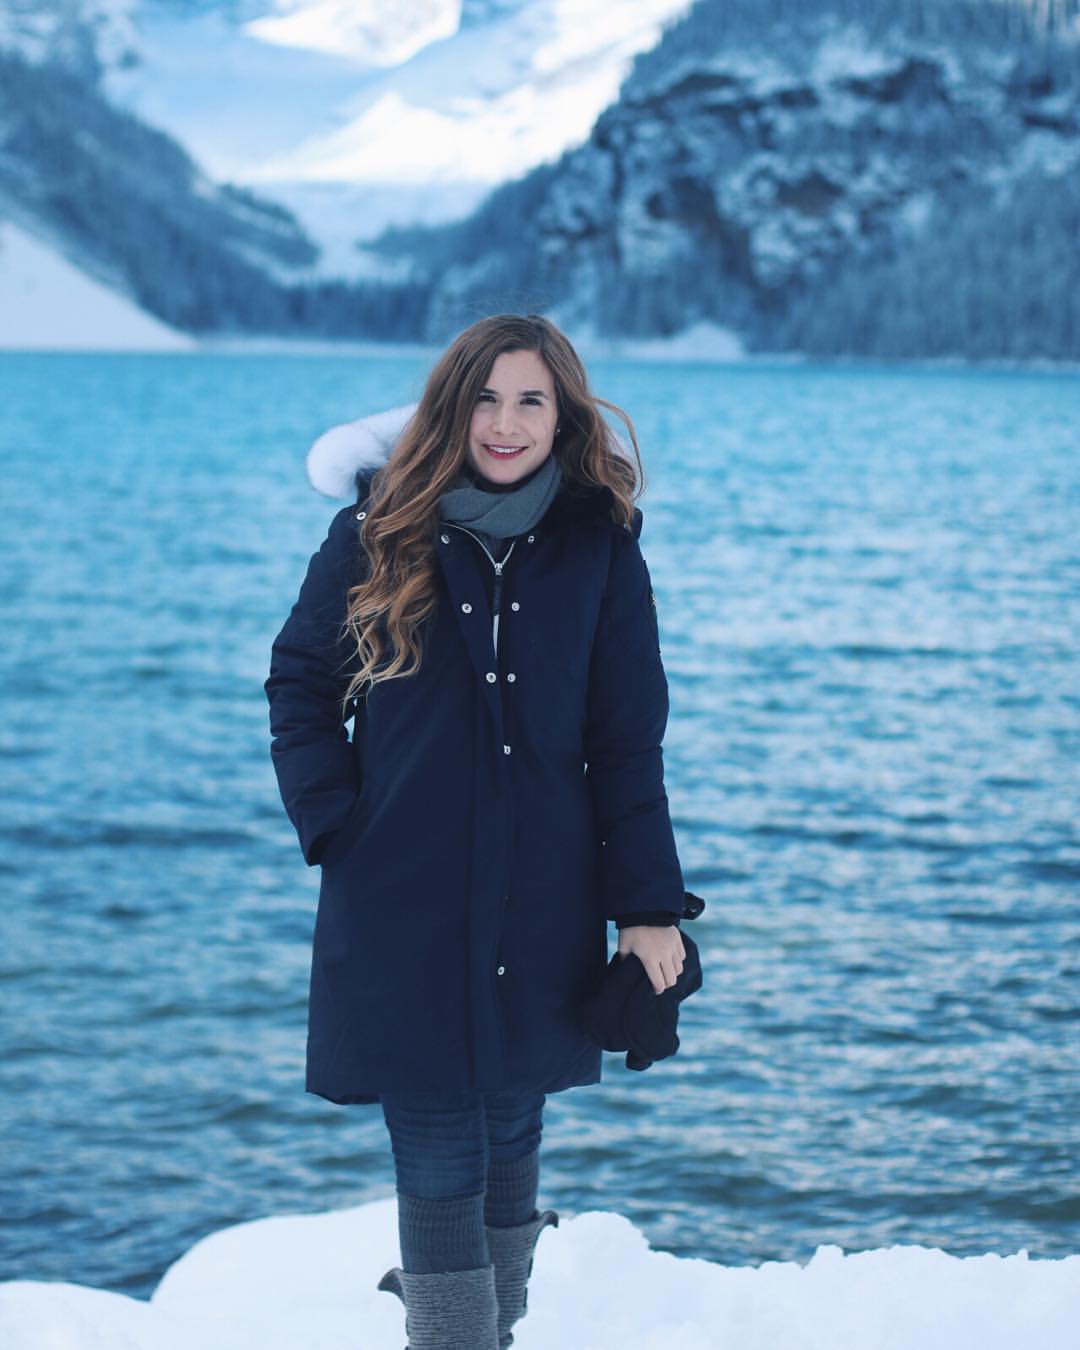 A woman in a navy coat and grey thigh-high socks stands before a snowy mountain landscape and a lake.